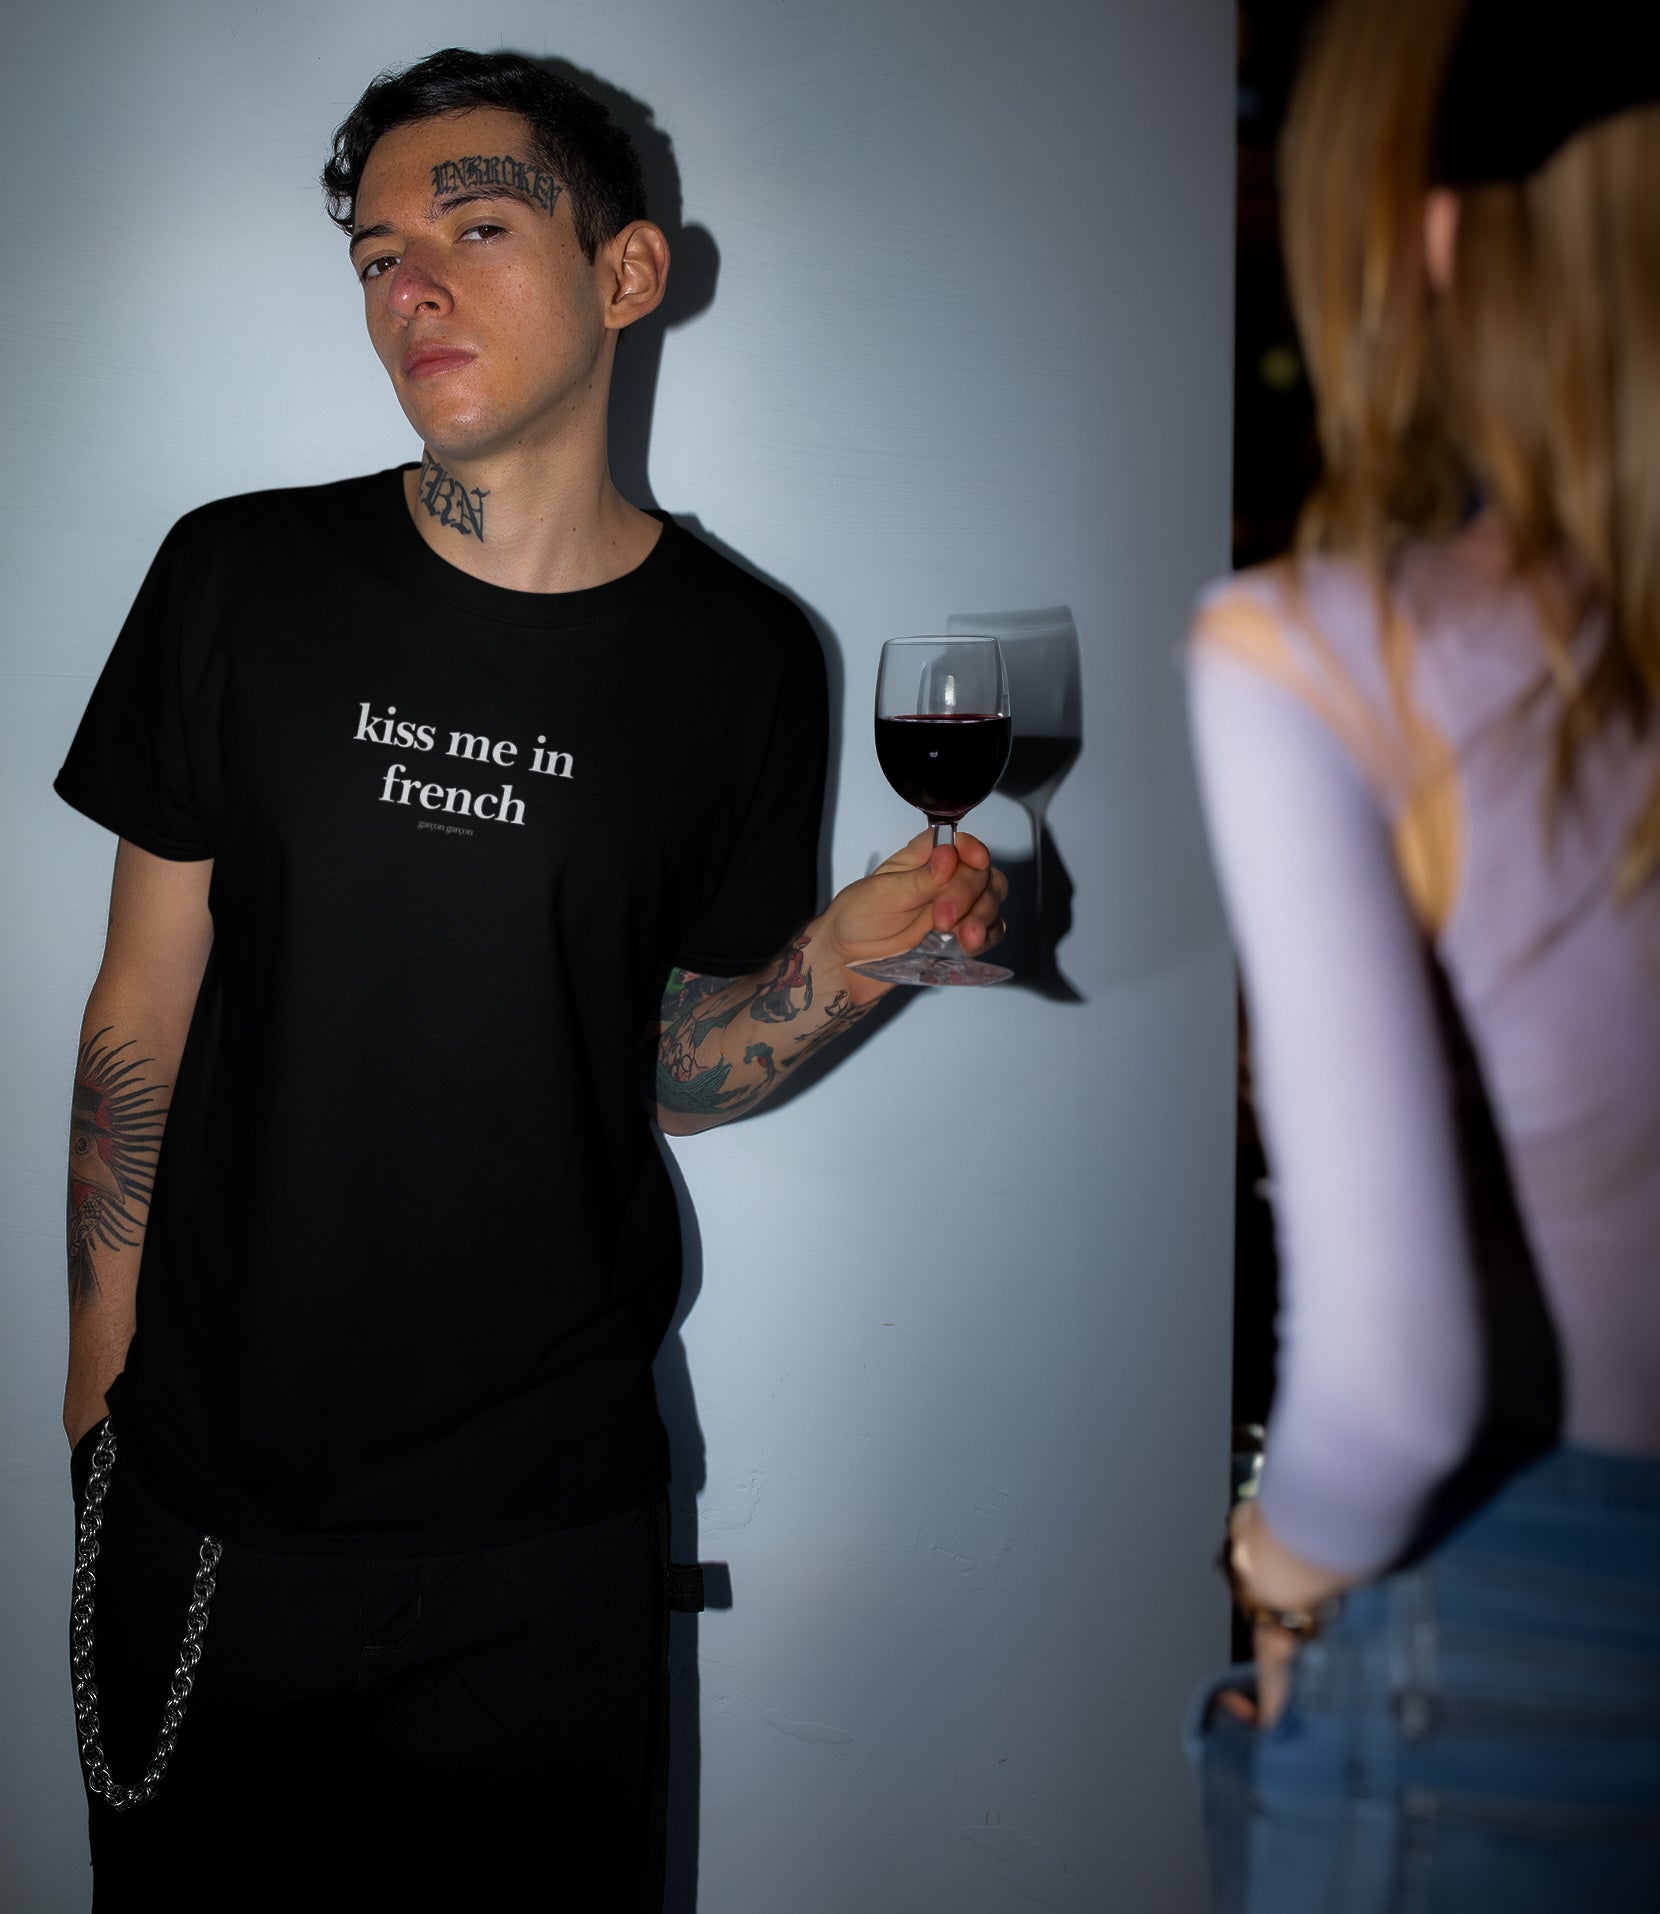 A man gazes thoughtfully away, a glass of red wine in hand, wearing a black t-shirt emblazoned with "kiss me in french" in crisp white lettering. The intimate moment is captured with soft lighting against a simple backdrop, highlighting the shirt's message and the urban, tattooed style of the wearer.